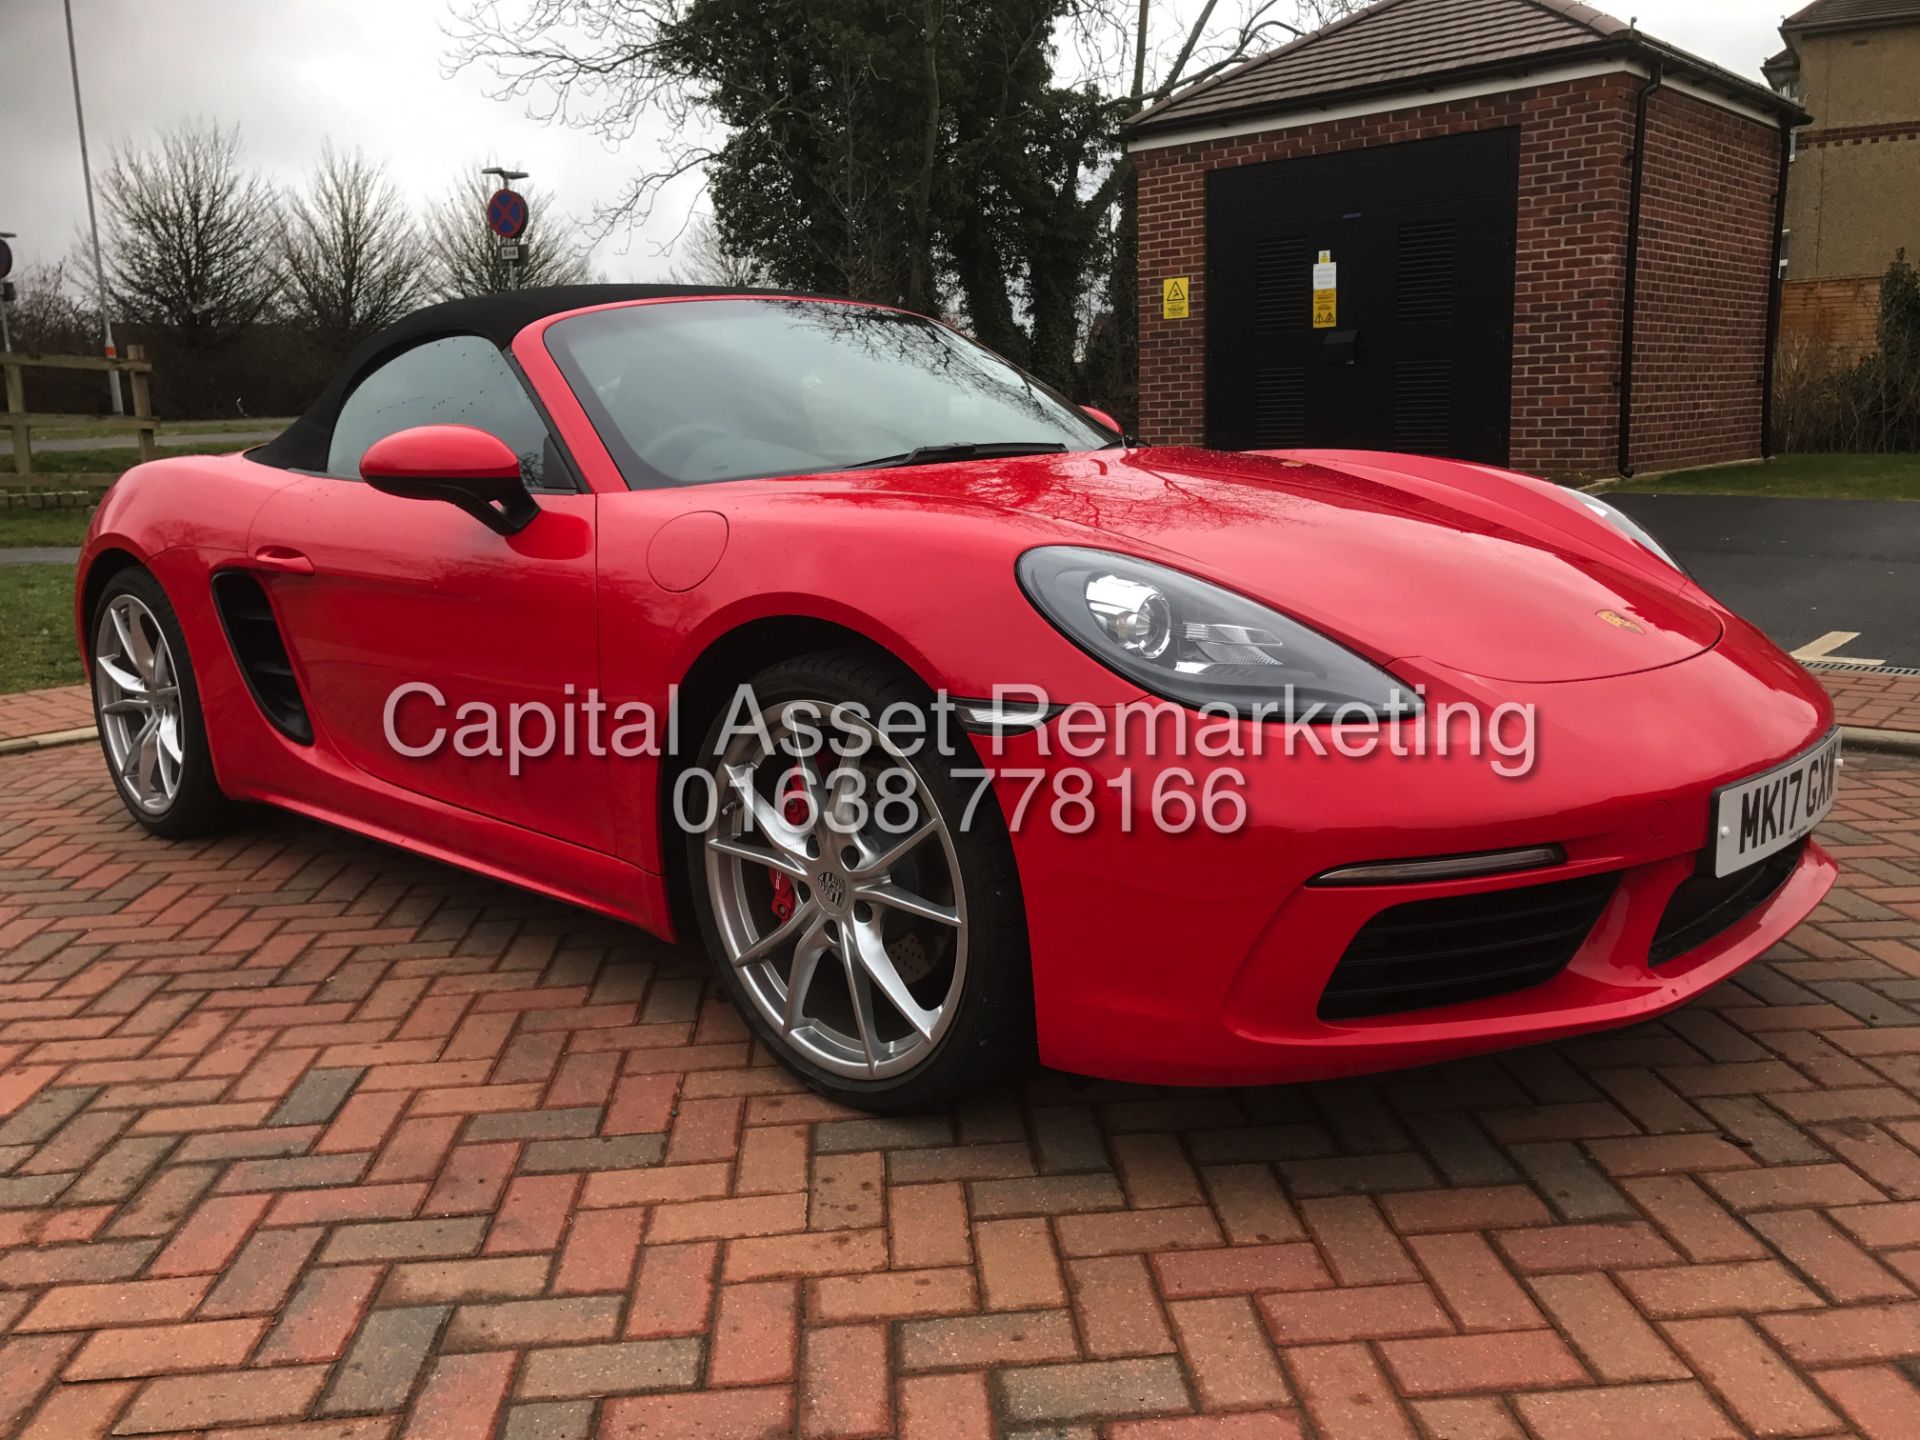 (ON SALE) PORSCHE BOXSTER S (718)CONVERTIBLE (17REG) NEW SHAPE-350 BHP-PDK AUTO' (1 OWNER-LOW MILES) - Image 4 of 34